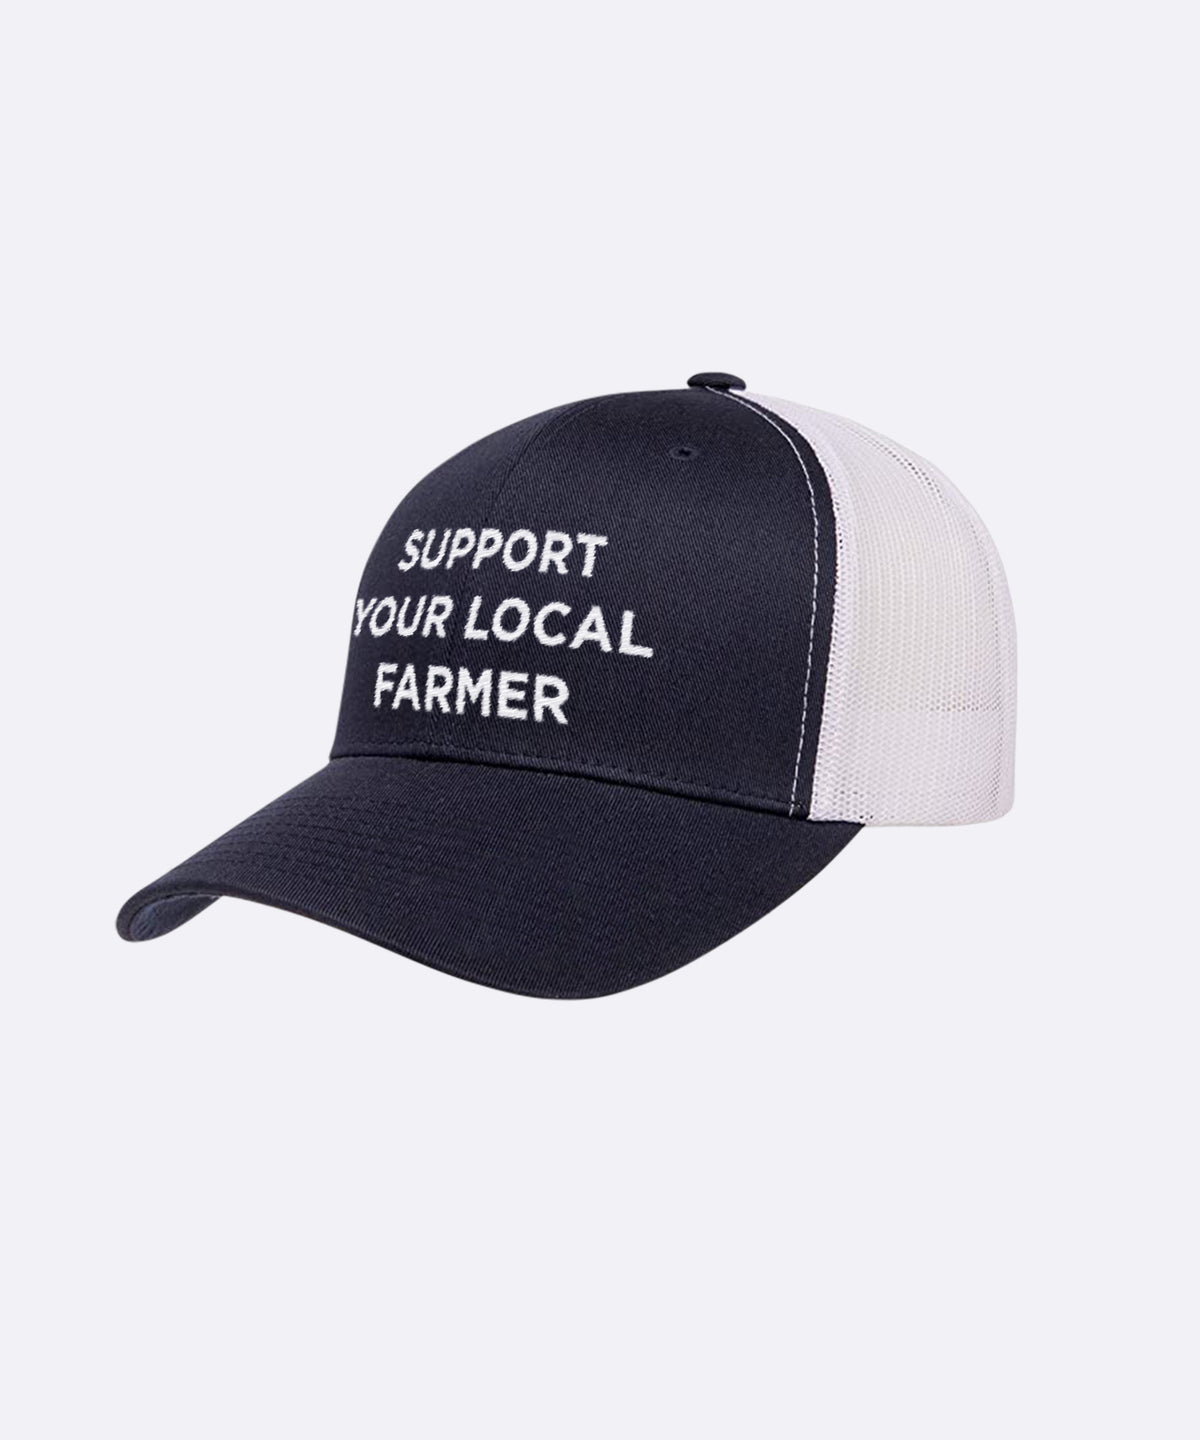 Support Your Local Farmer Trucker Hat